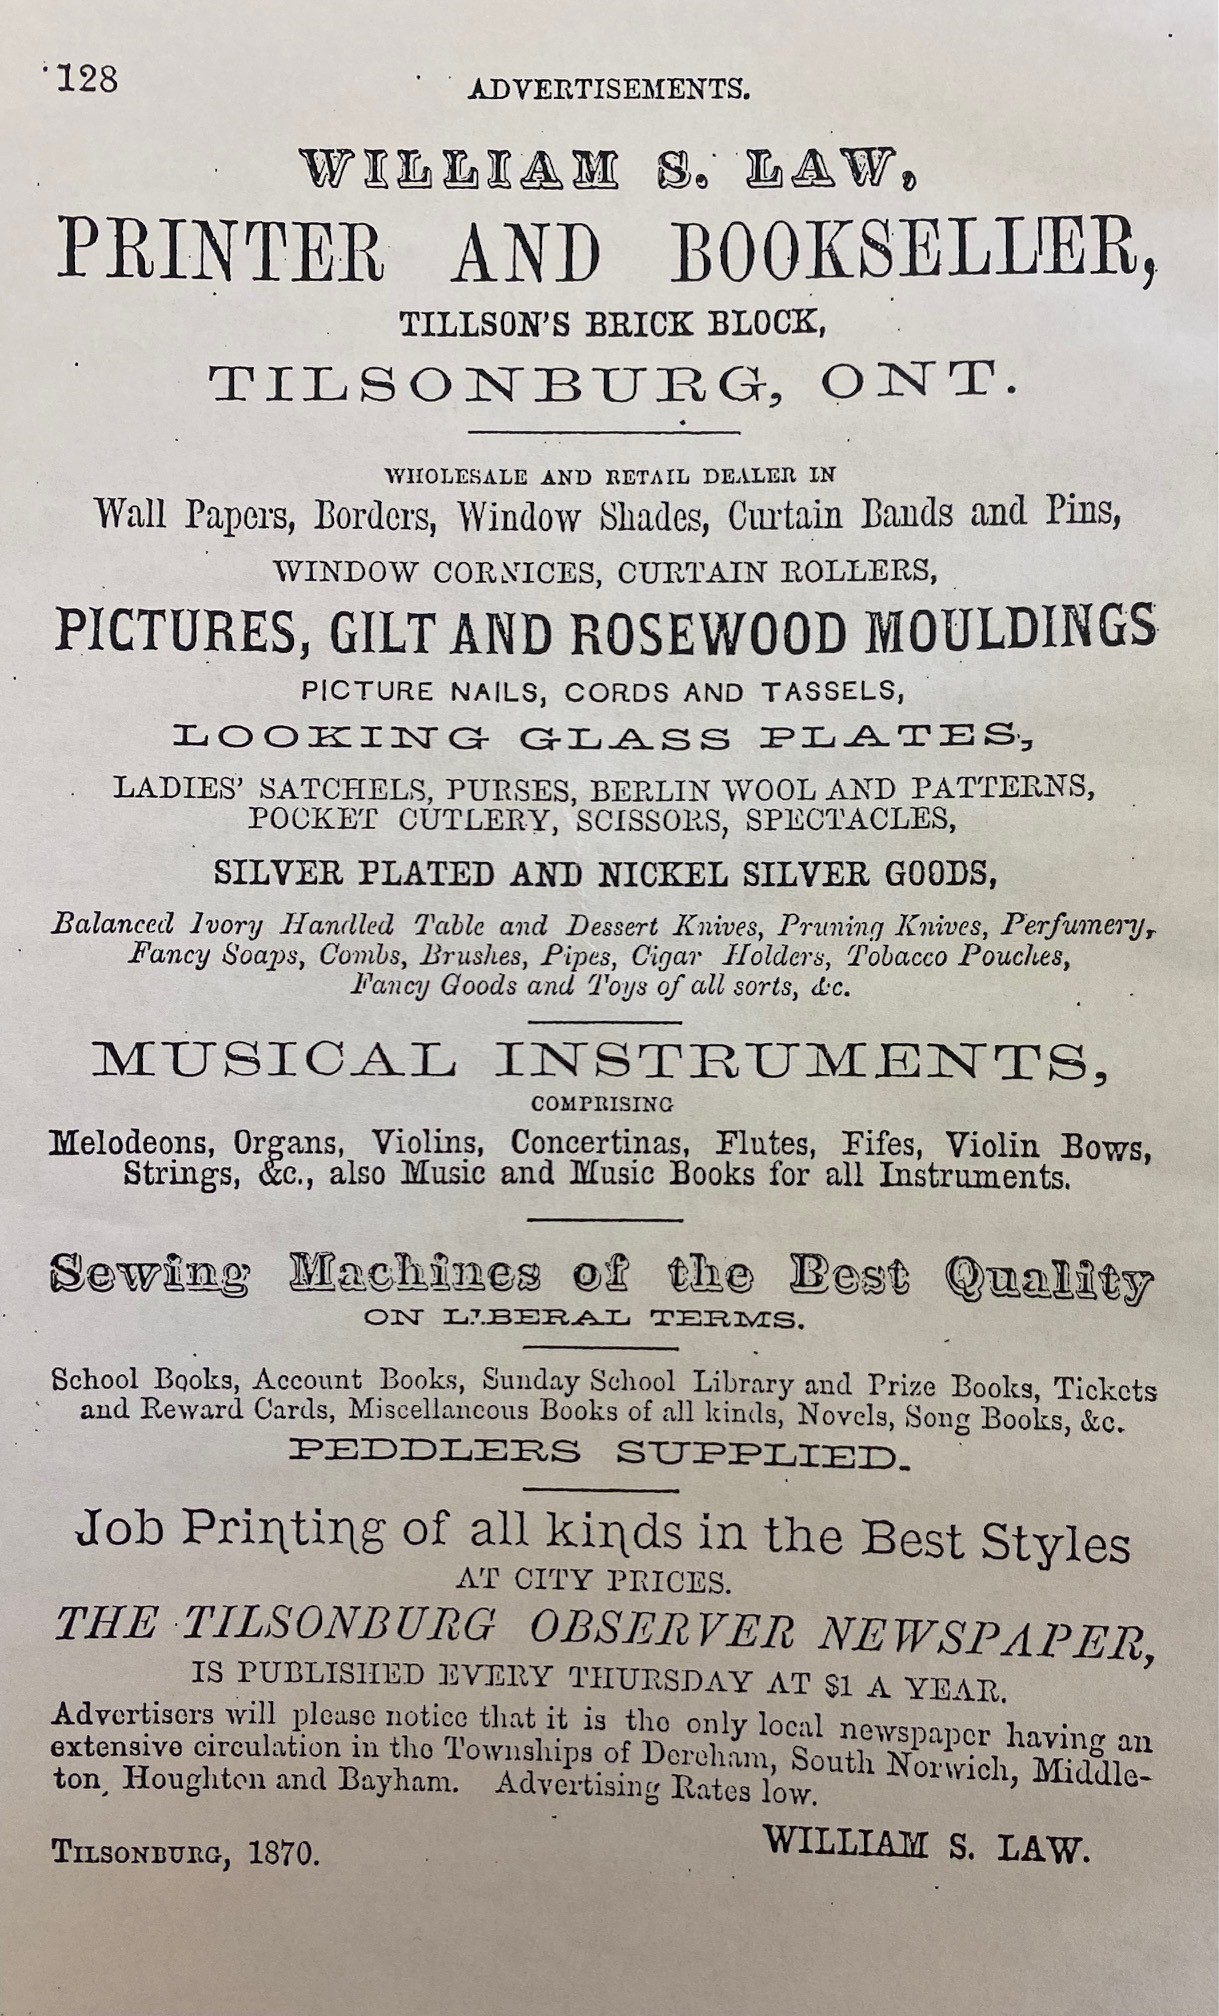 Advertisement for W.S. Law, printer and bookseller. Lists the goods he deals in and the type of printing services he offers.